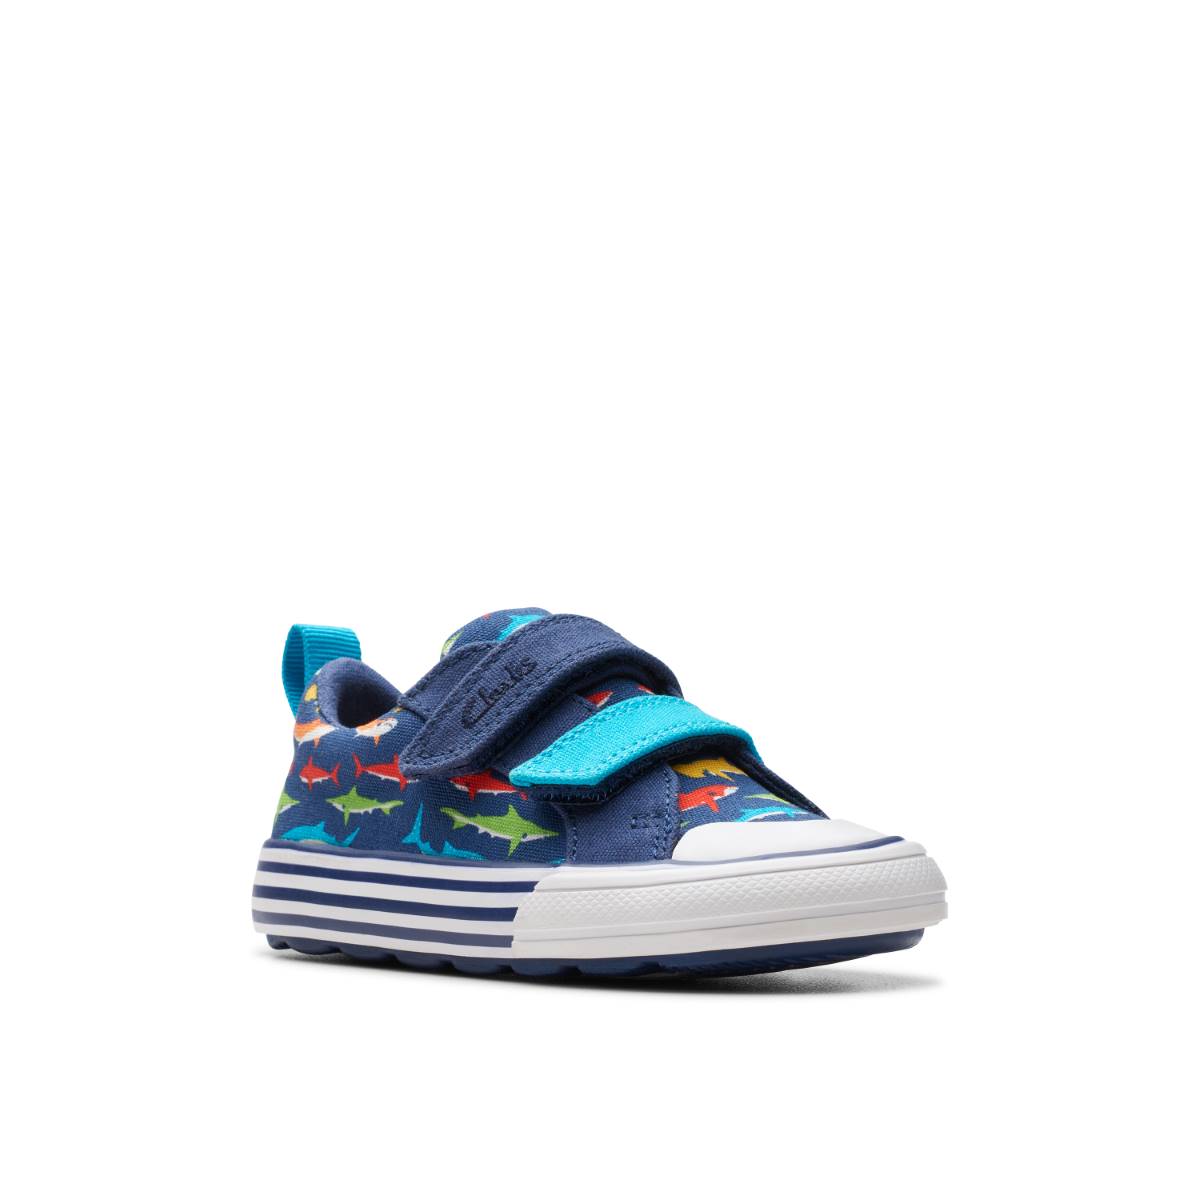 Clarks Foxing Ocean T Navy Kids Toddler Boys Trainers 7666-86F in a Plain Textile in Size 5.5